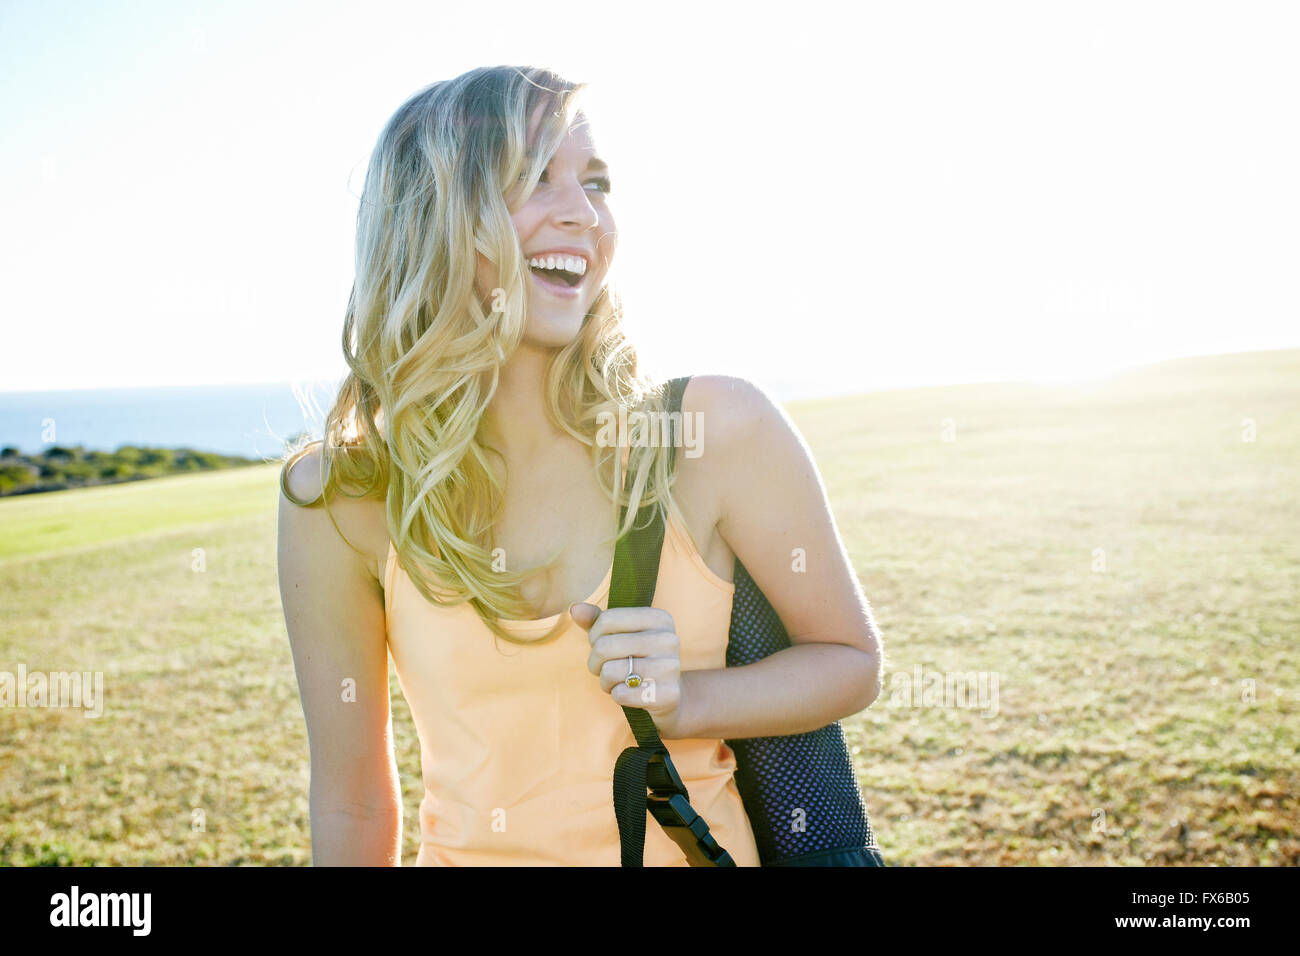 Caucasian woman laughing in field Stock Photo